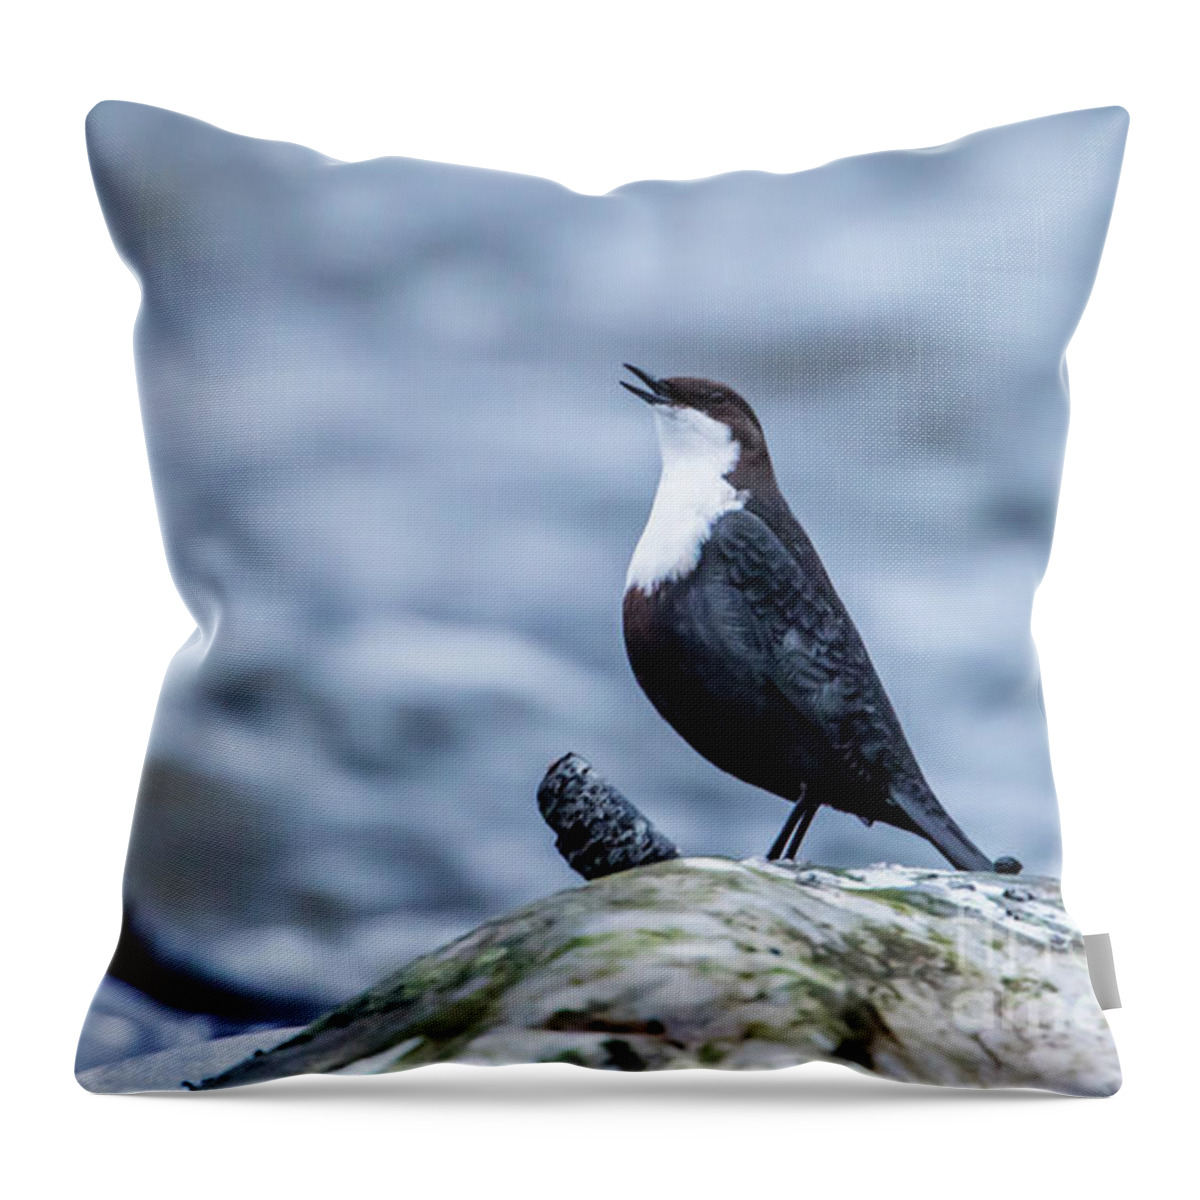 Dipper's Call Throw Pillow featuring the photograph Dipper's Call by Torbjorn Swenelius